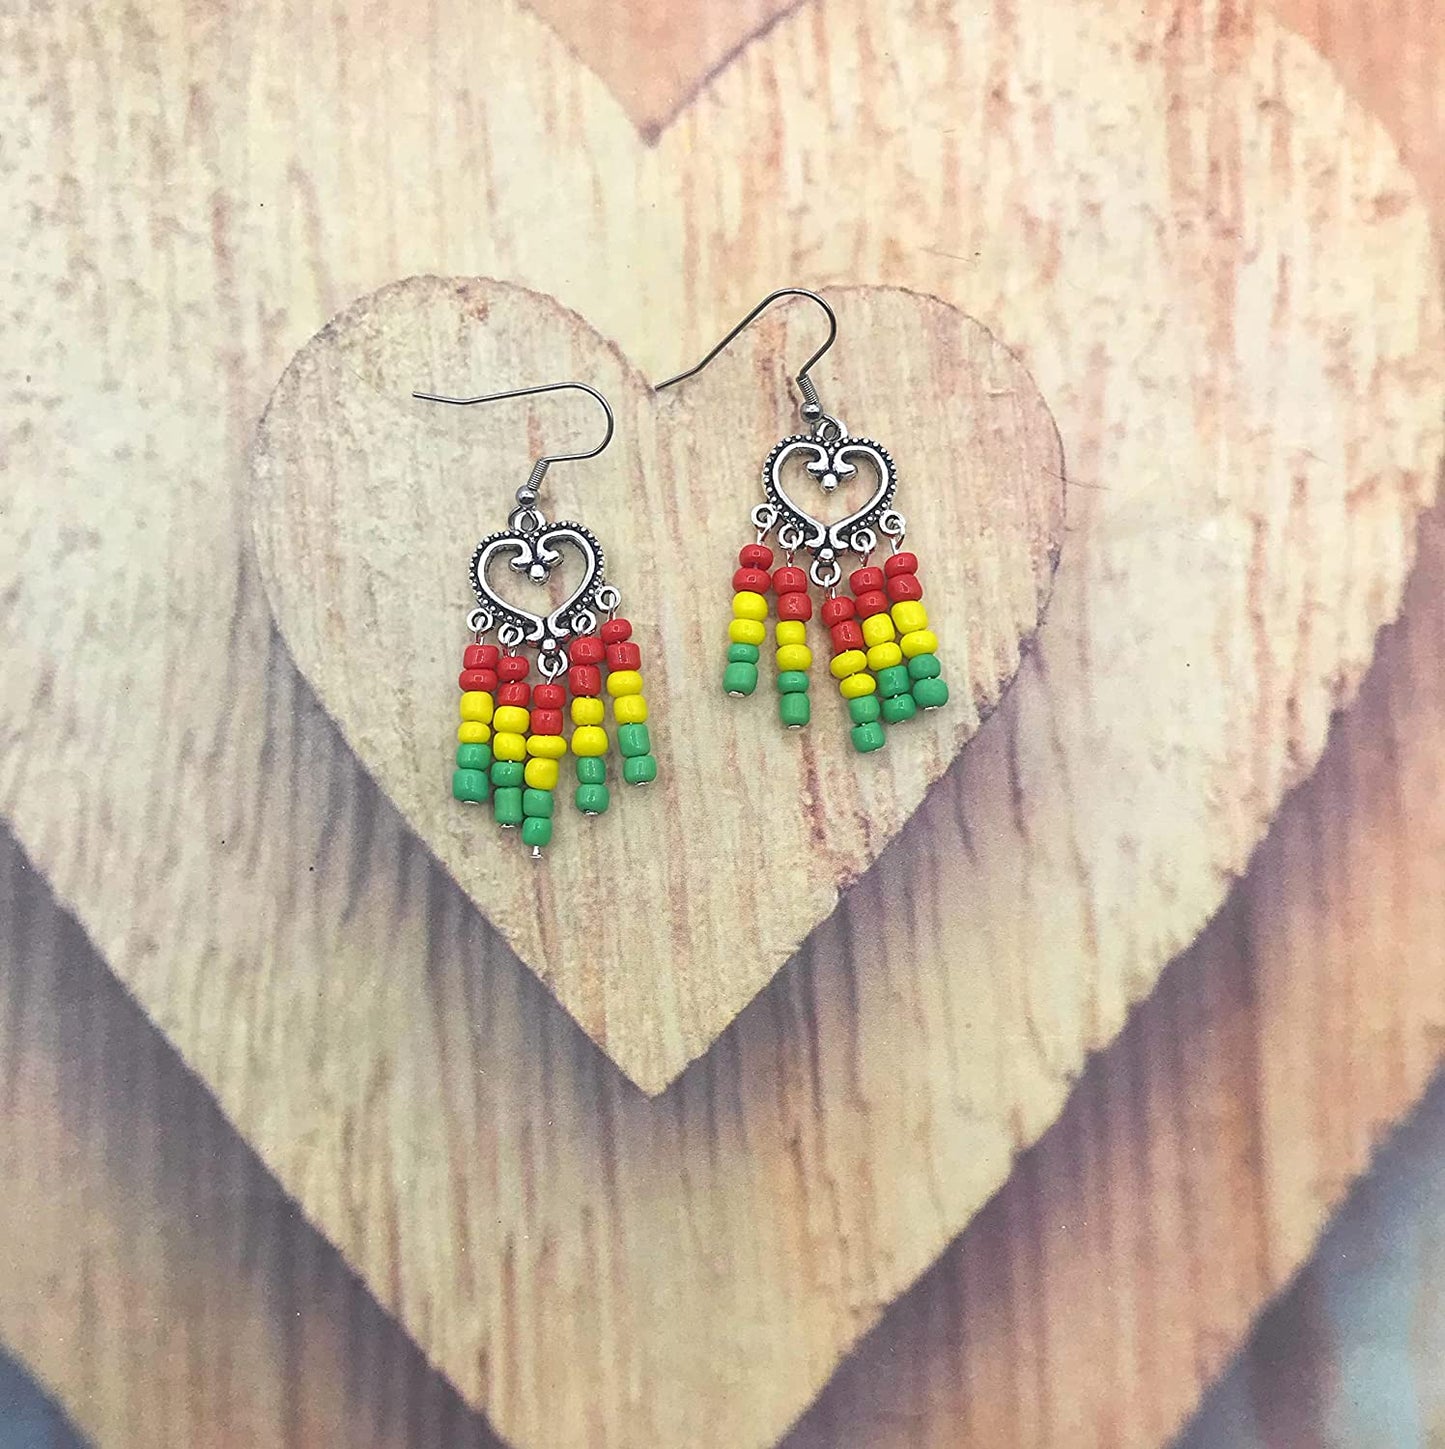 Rasta earrings in red yellow and green on a wooden display from Scott D Jewelry Designs